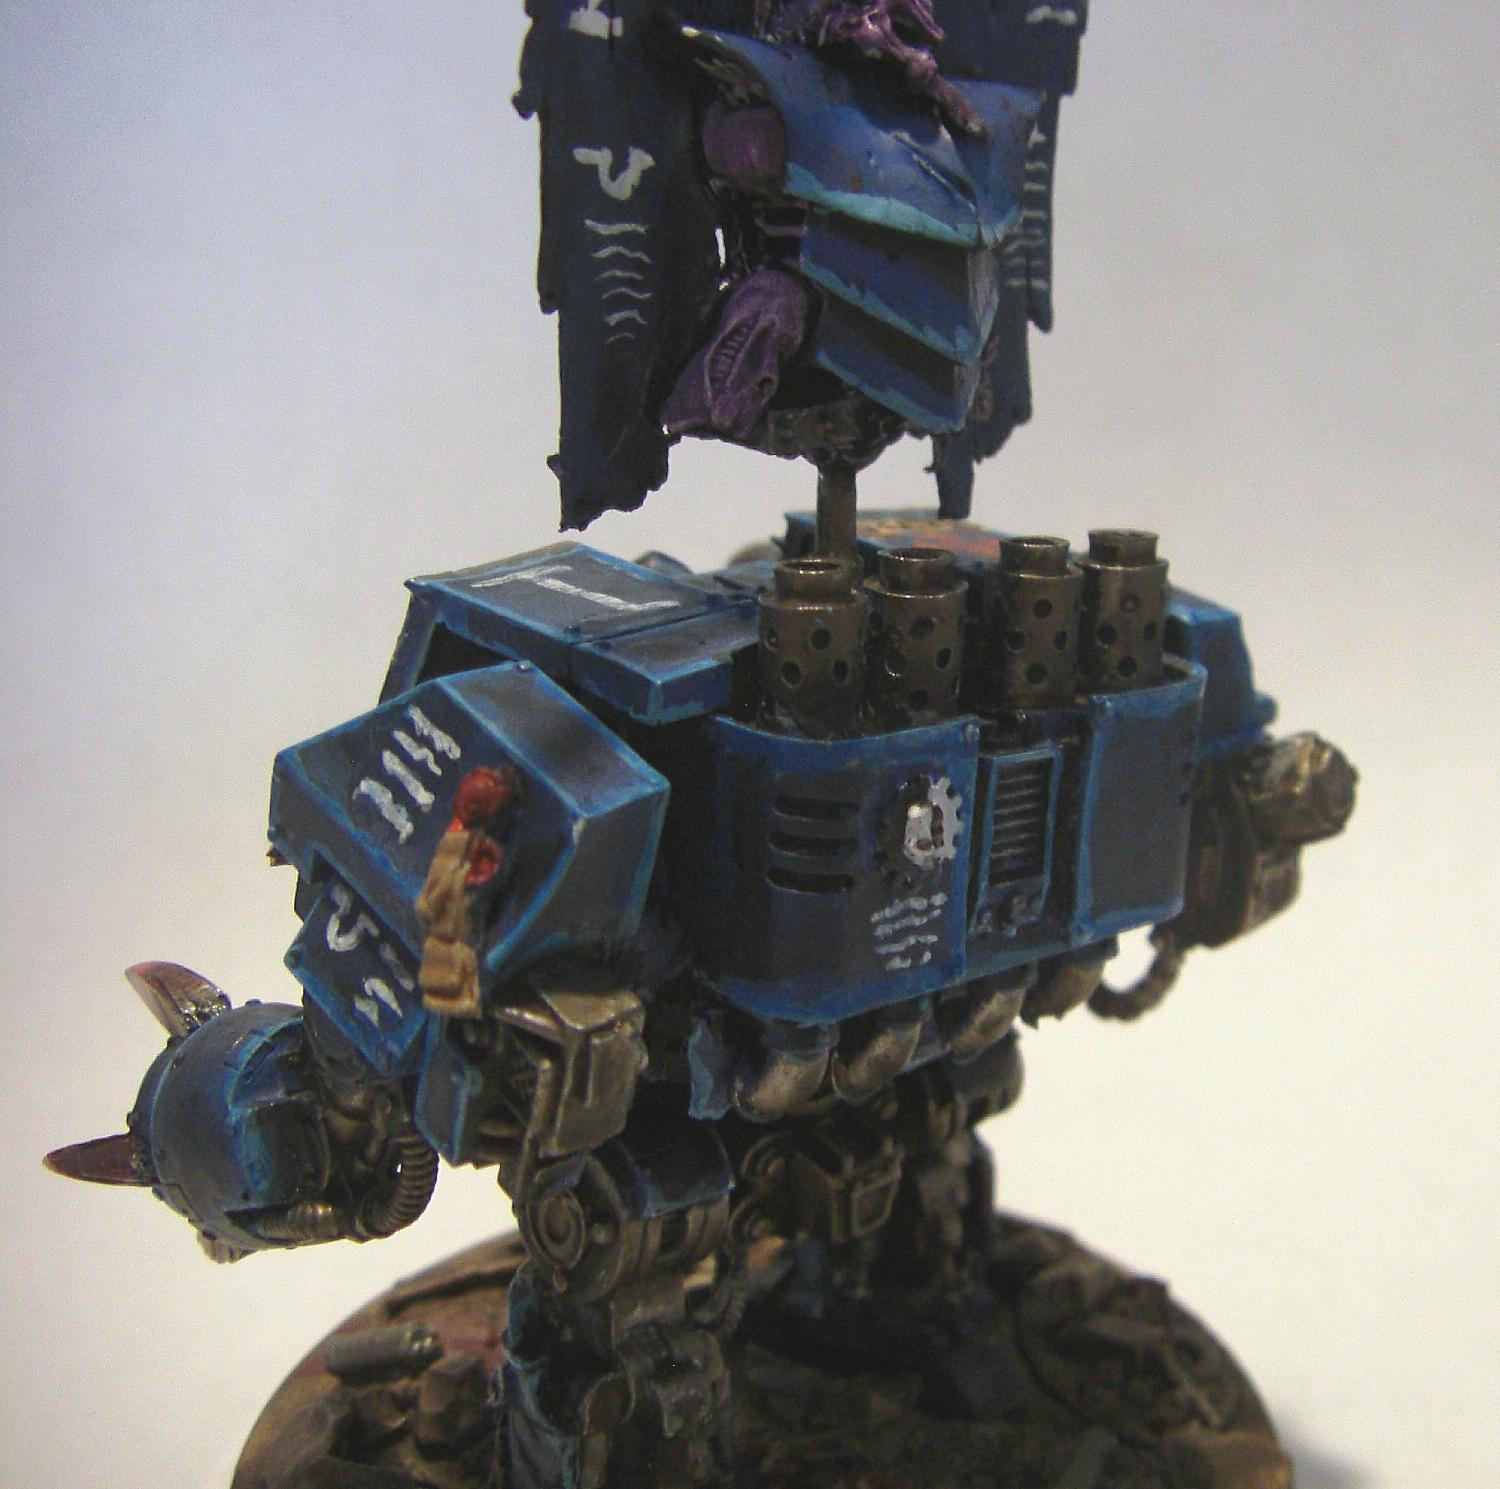 Dreadnought, Forge World, Space Marines, Ultramarines, Venerable